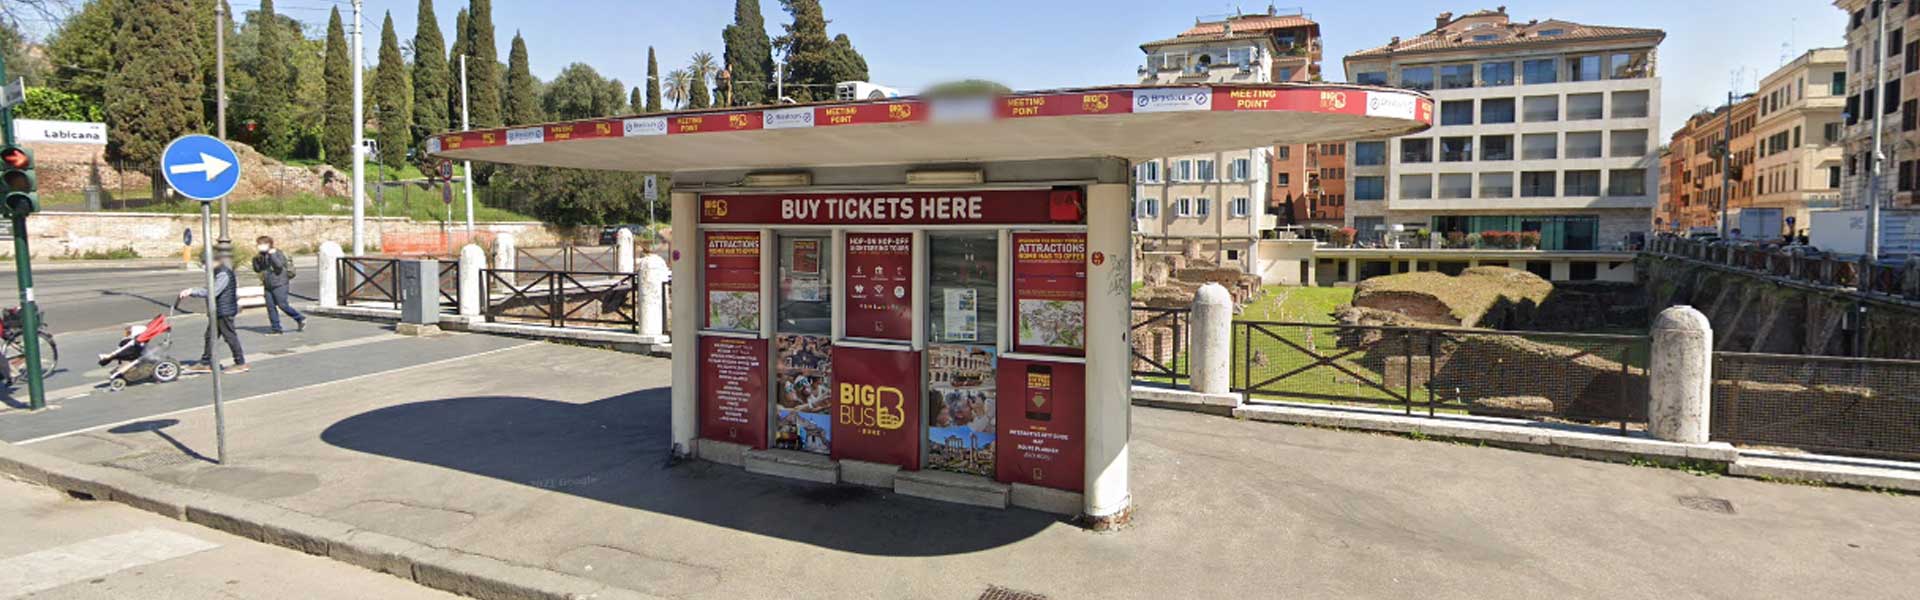 Big Bus Tours Rome Information Kiosk at the Colosseum